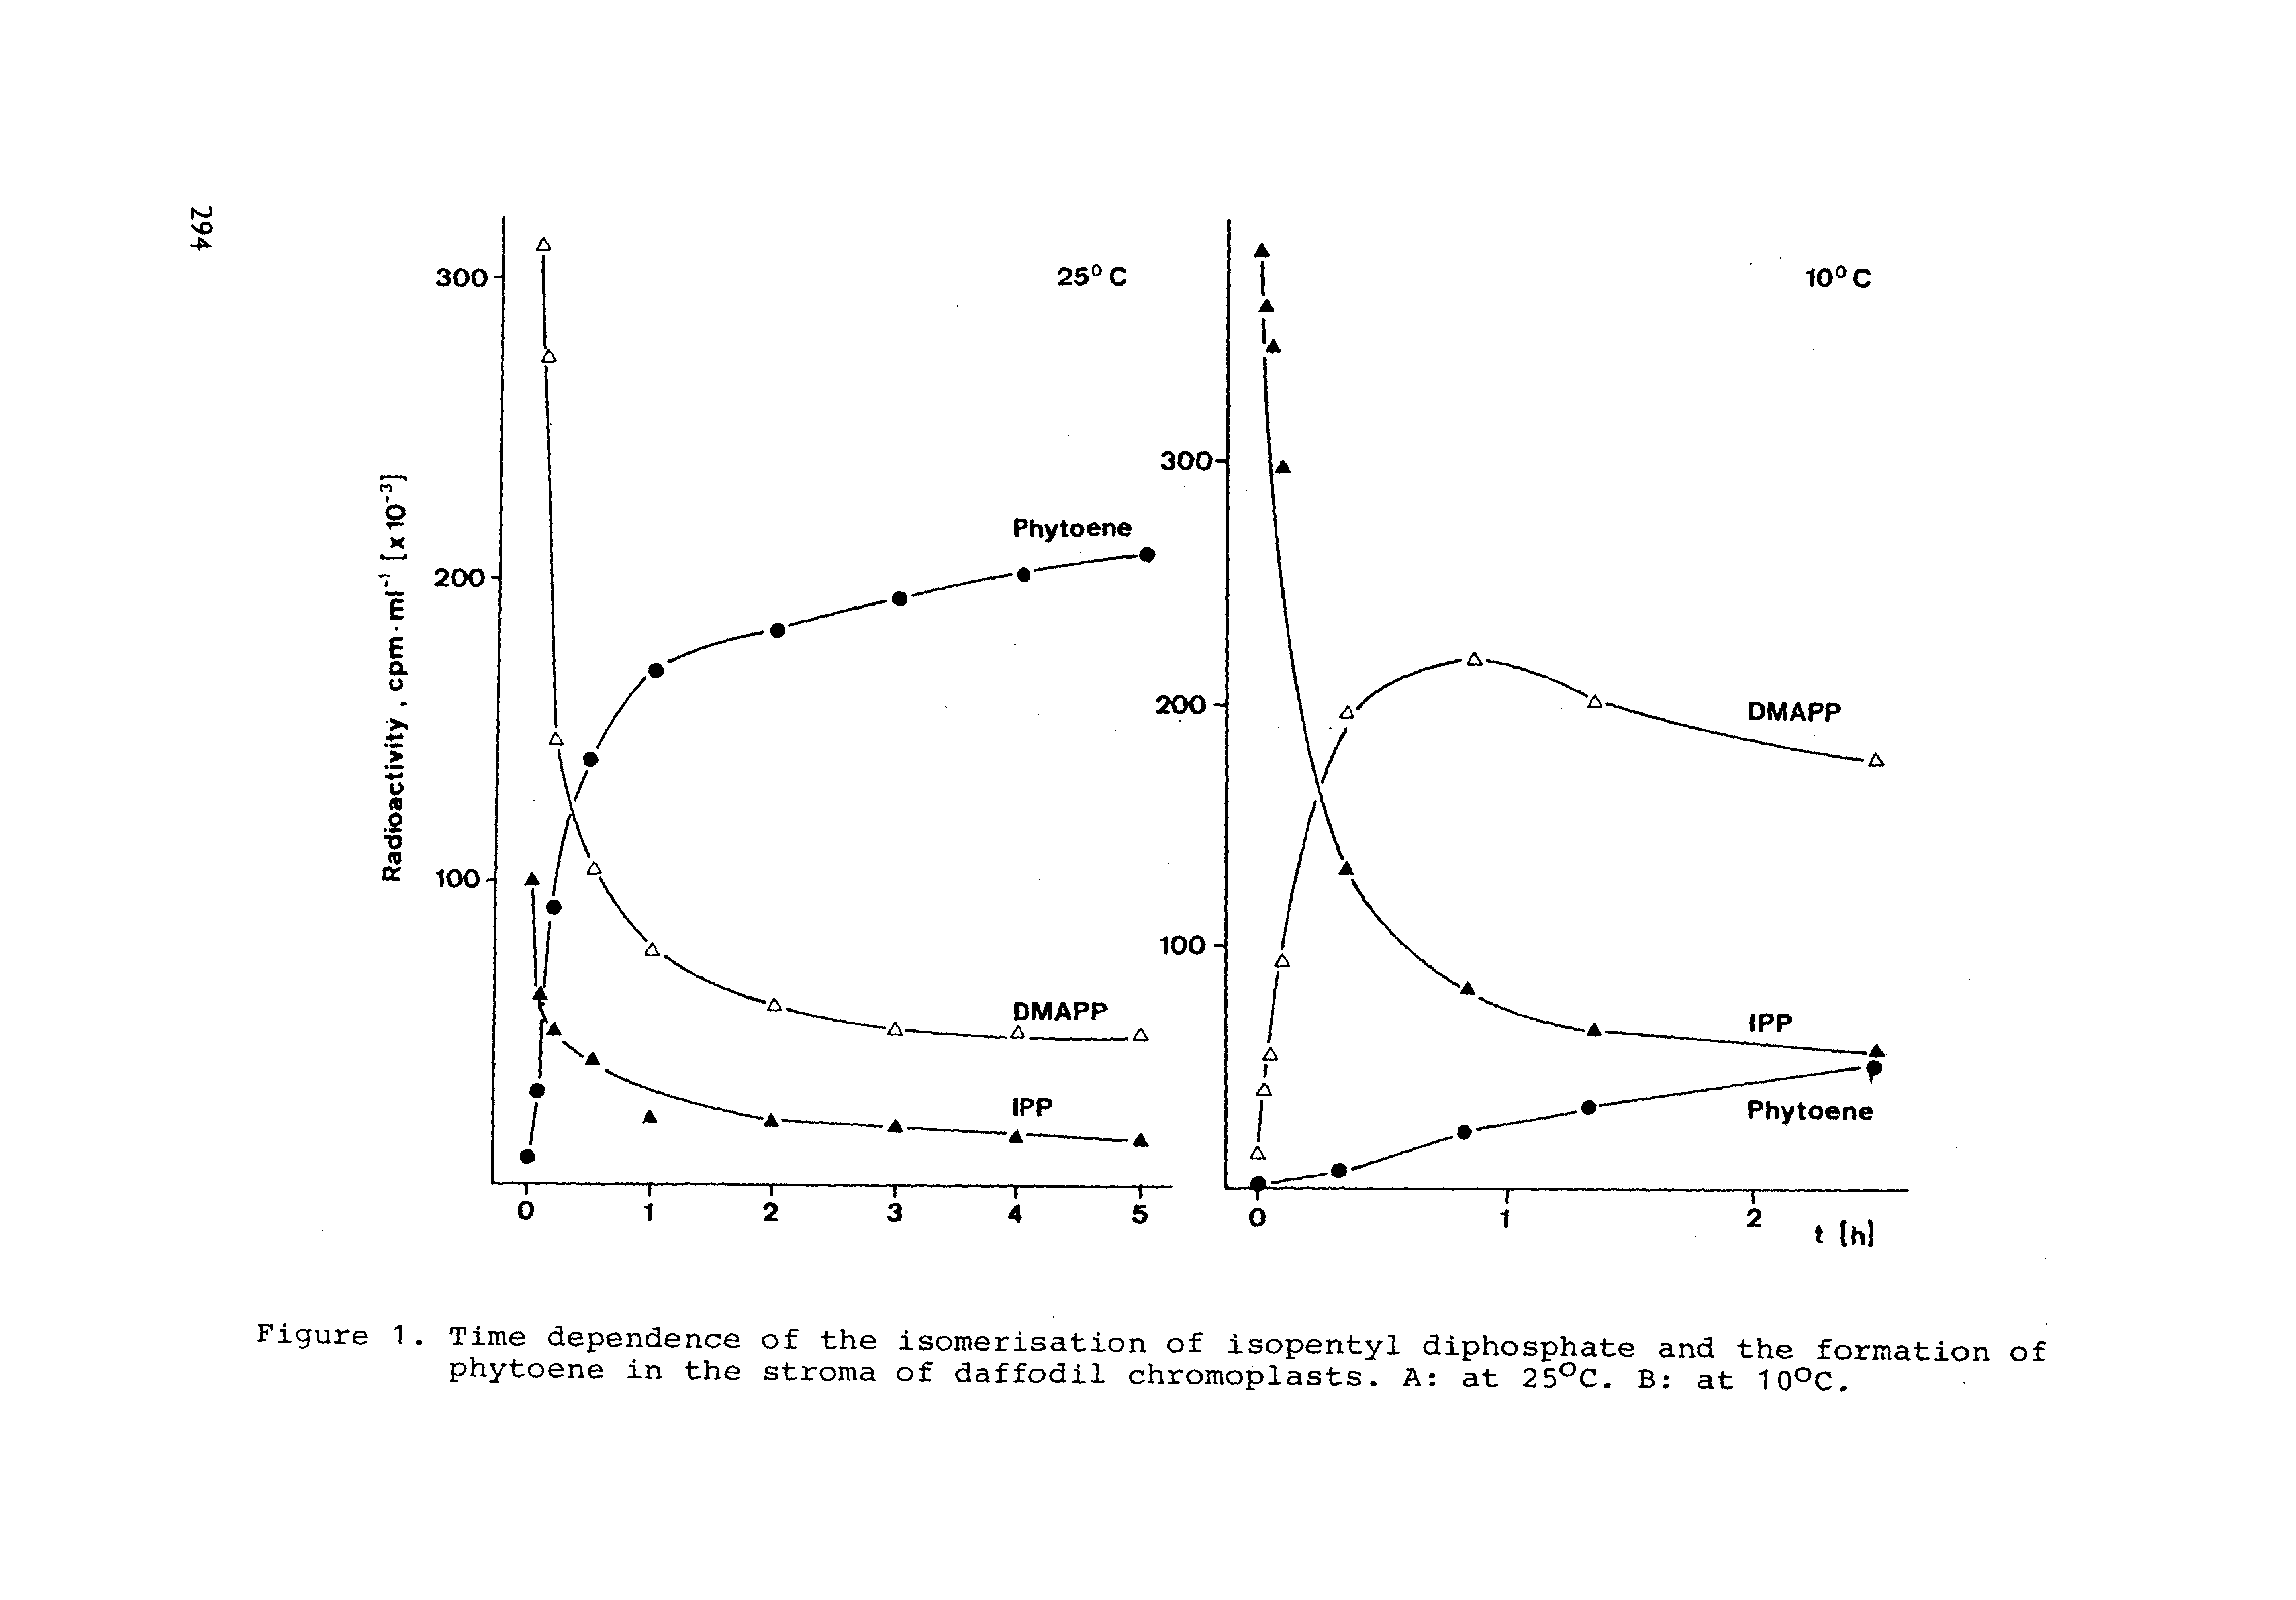 Figure 1. Time dependence of the isomerisation of isopentyl diphosphate and the formation of phytoene in the stroma of daffodil chromoplasts. A at 25 C. B at lO C.